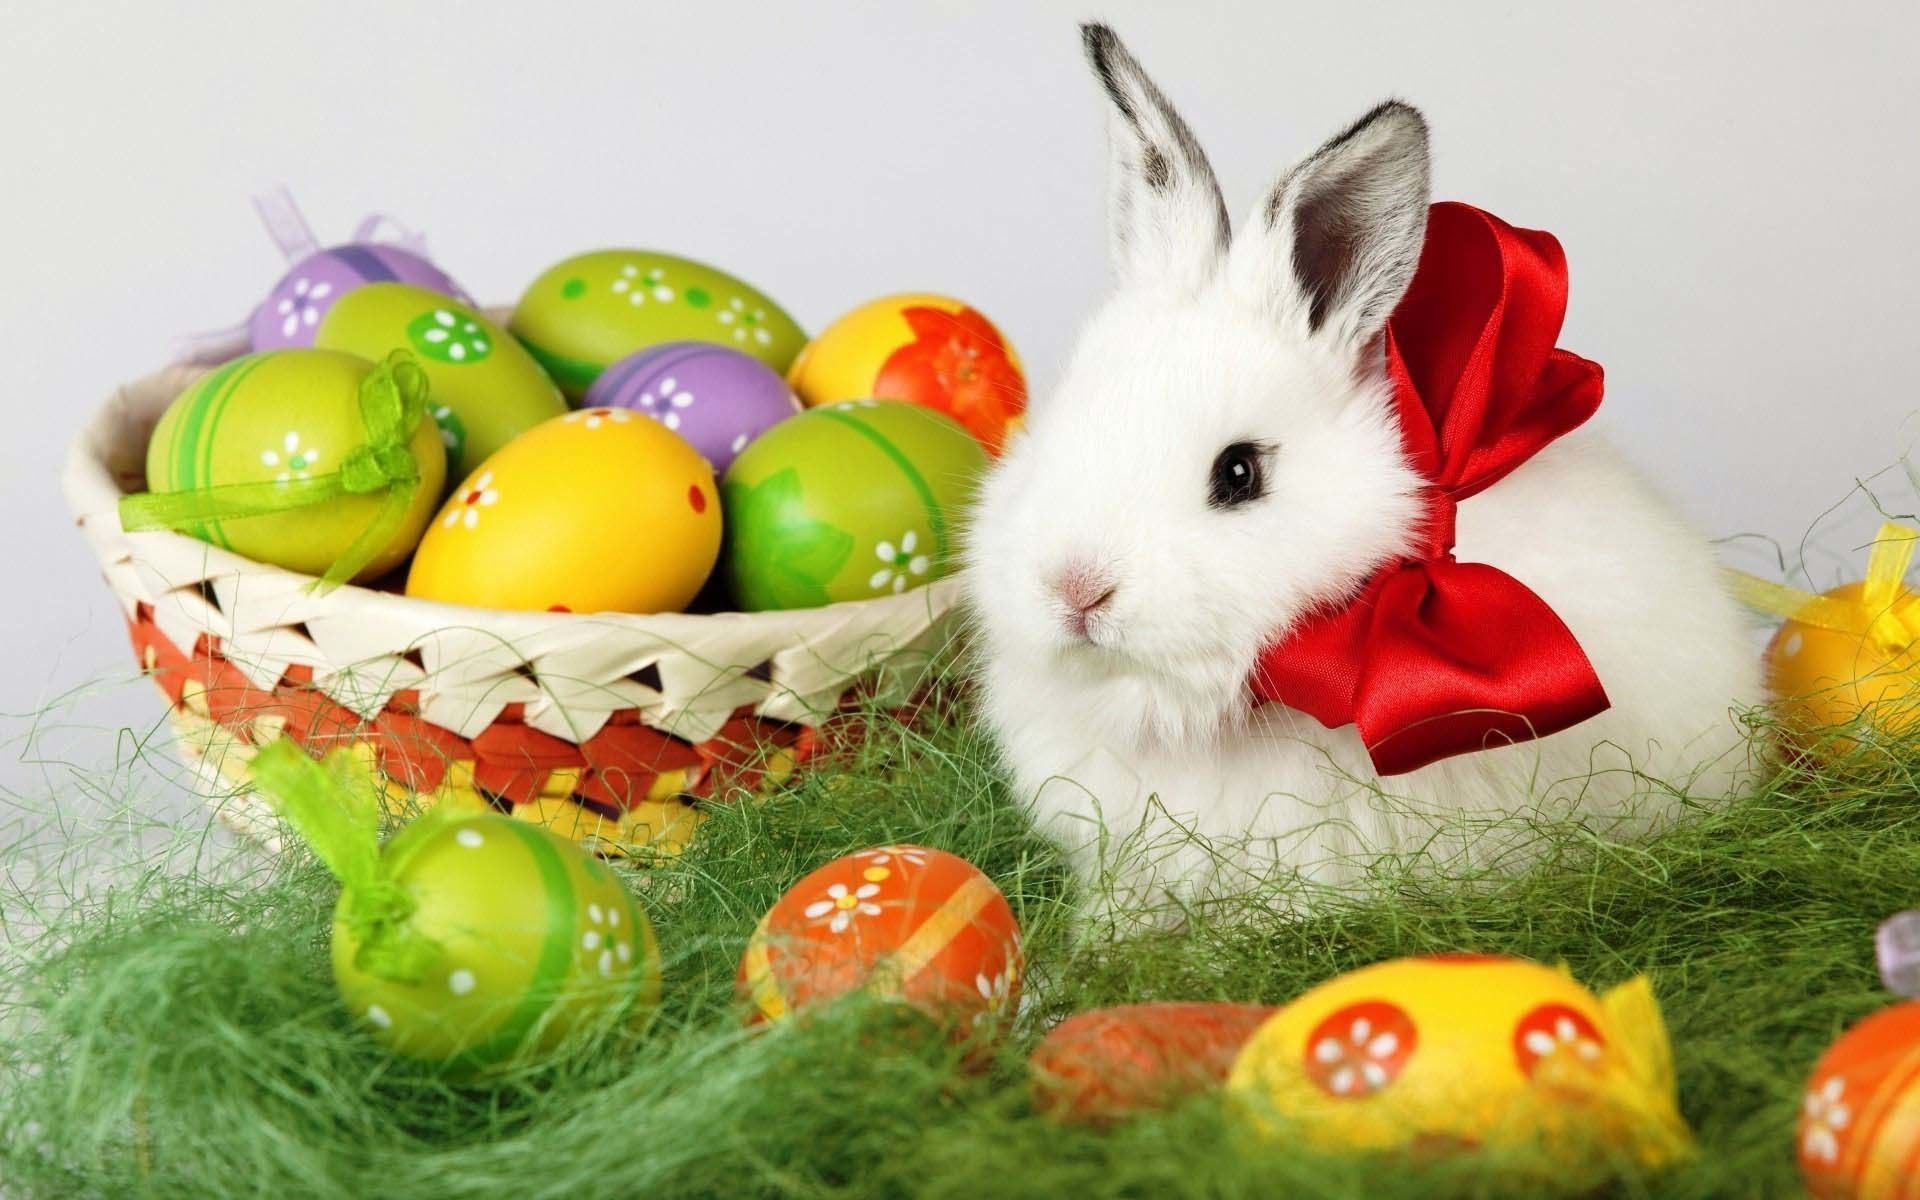 Easter bunny with a red bow sitting next to a basket of Easter eggs. - Easter, egg